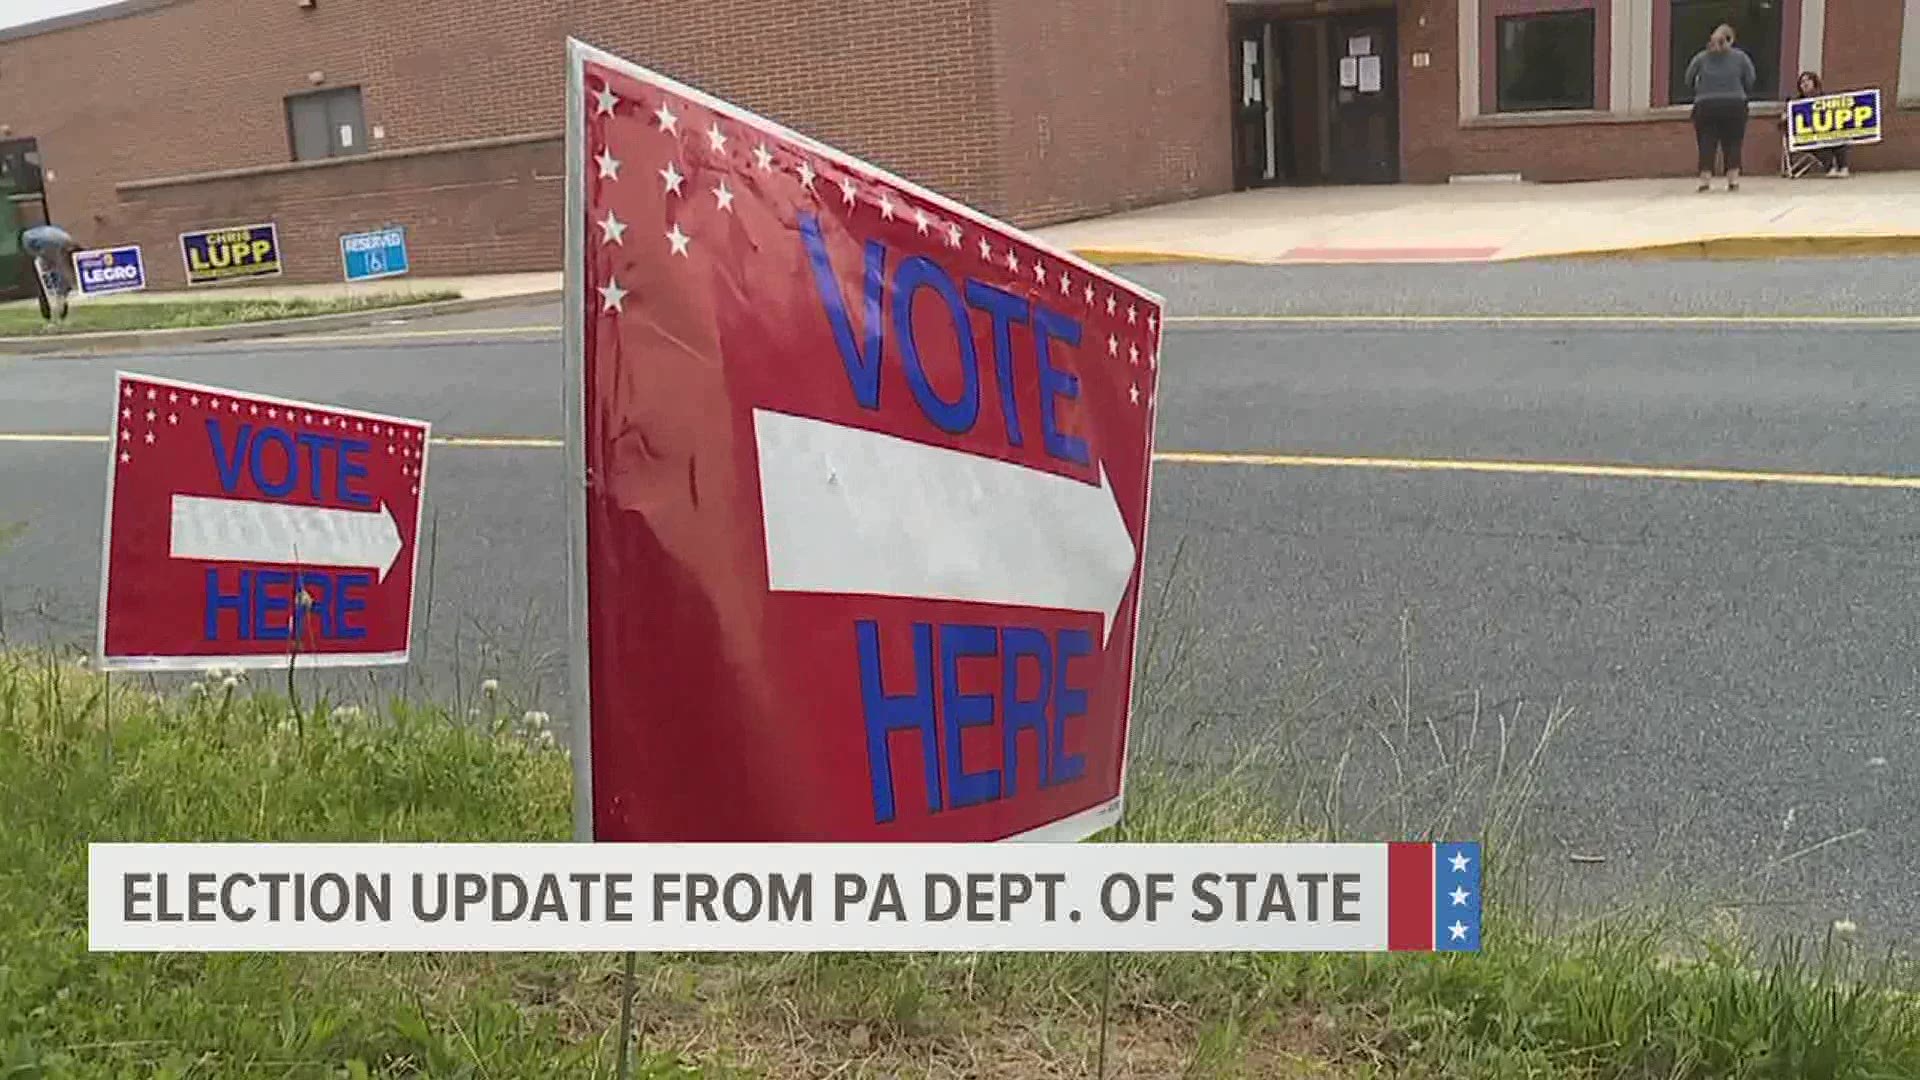 State officials report no major or widespread issues at the polls. They expect the overwhelming majority of ballots to be counted by Friday.